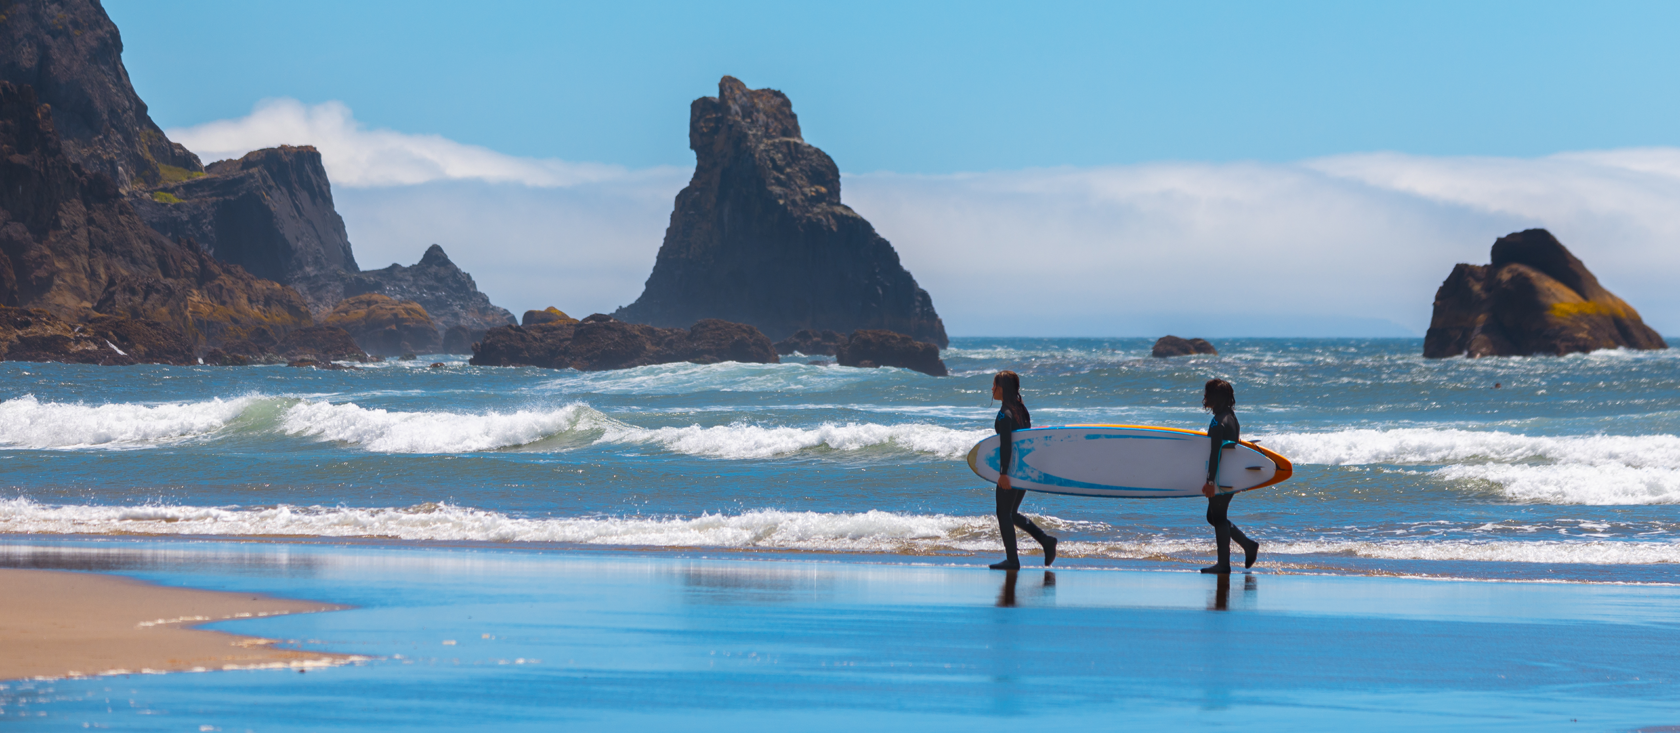 Two people carrying a surfboard on the pacific coast.